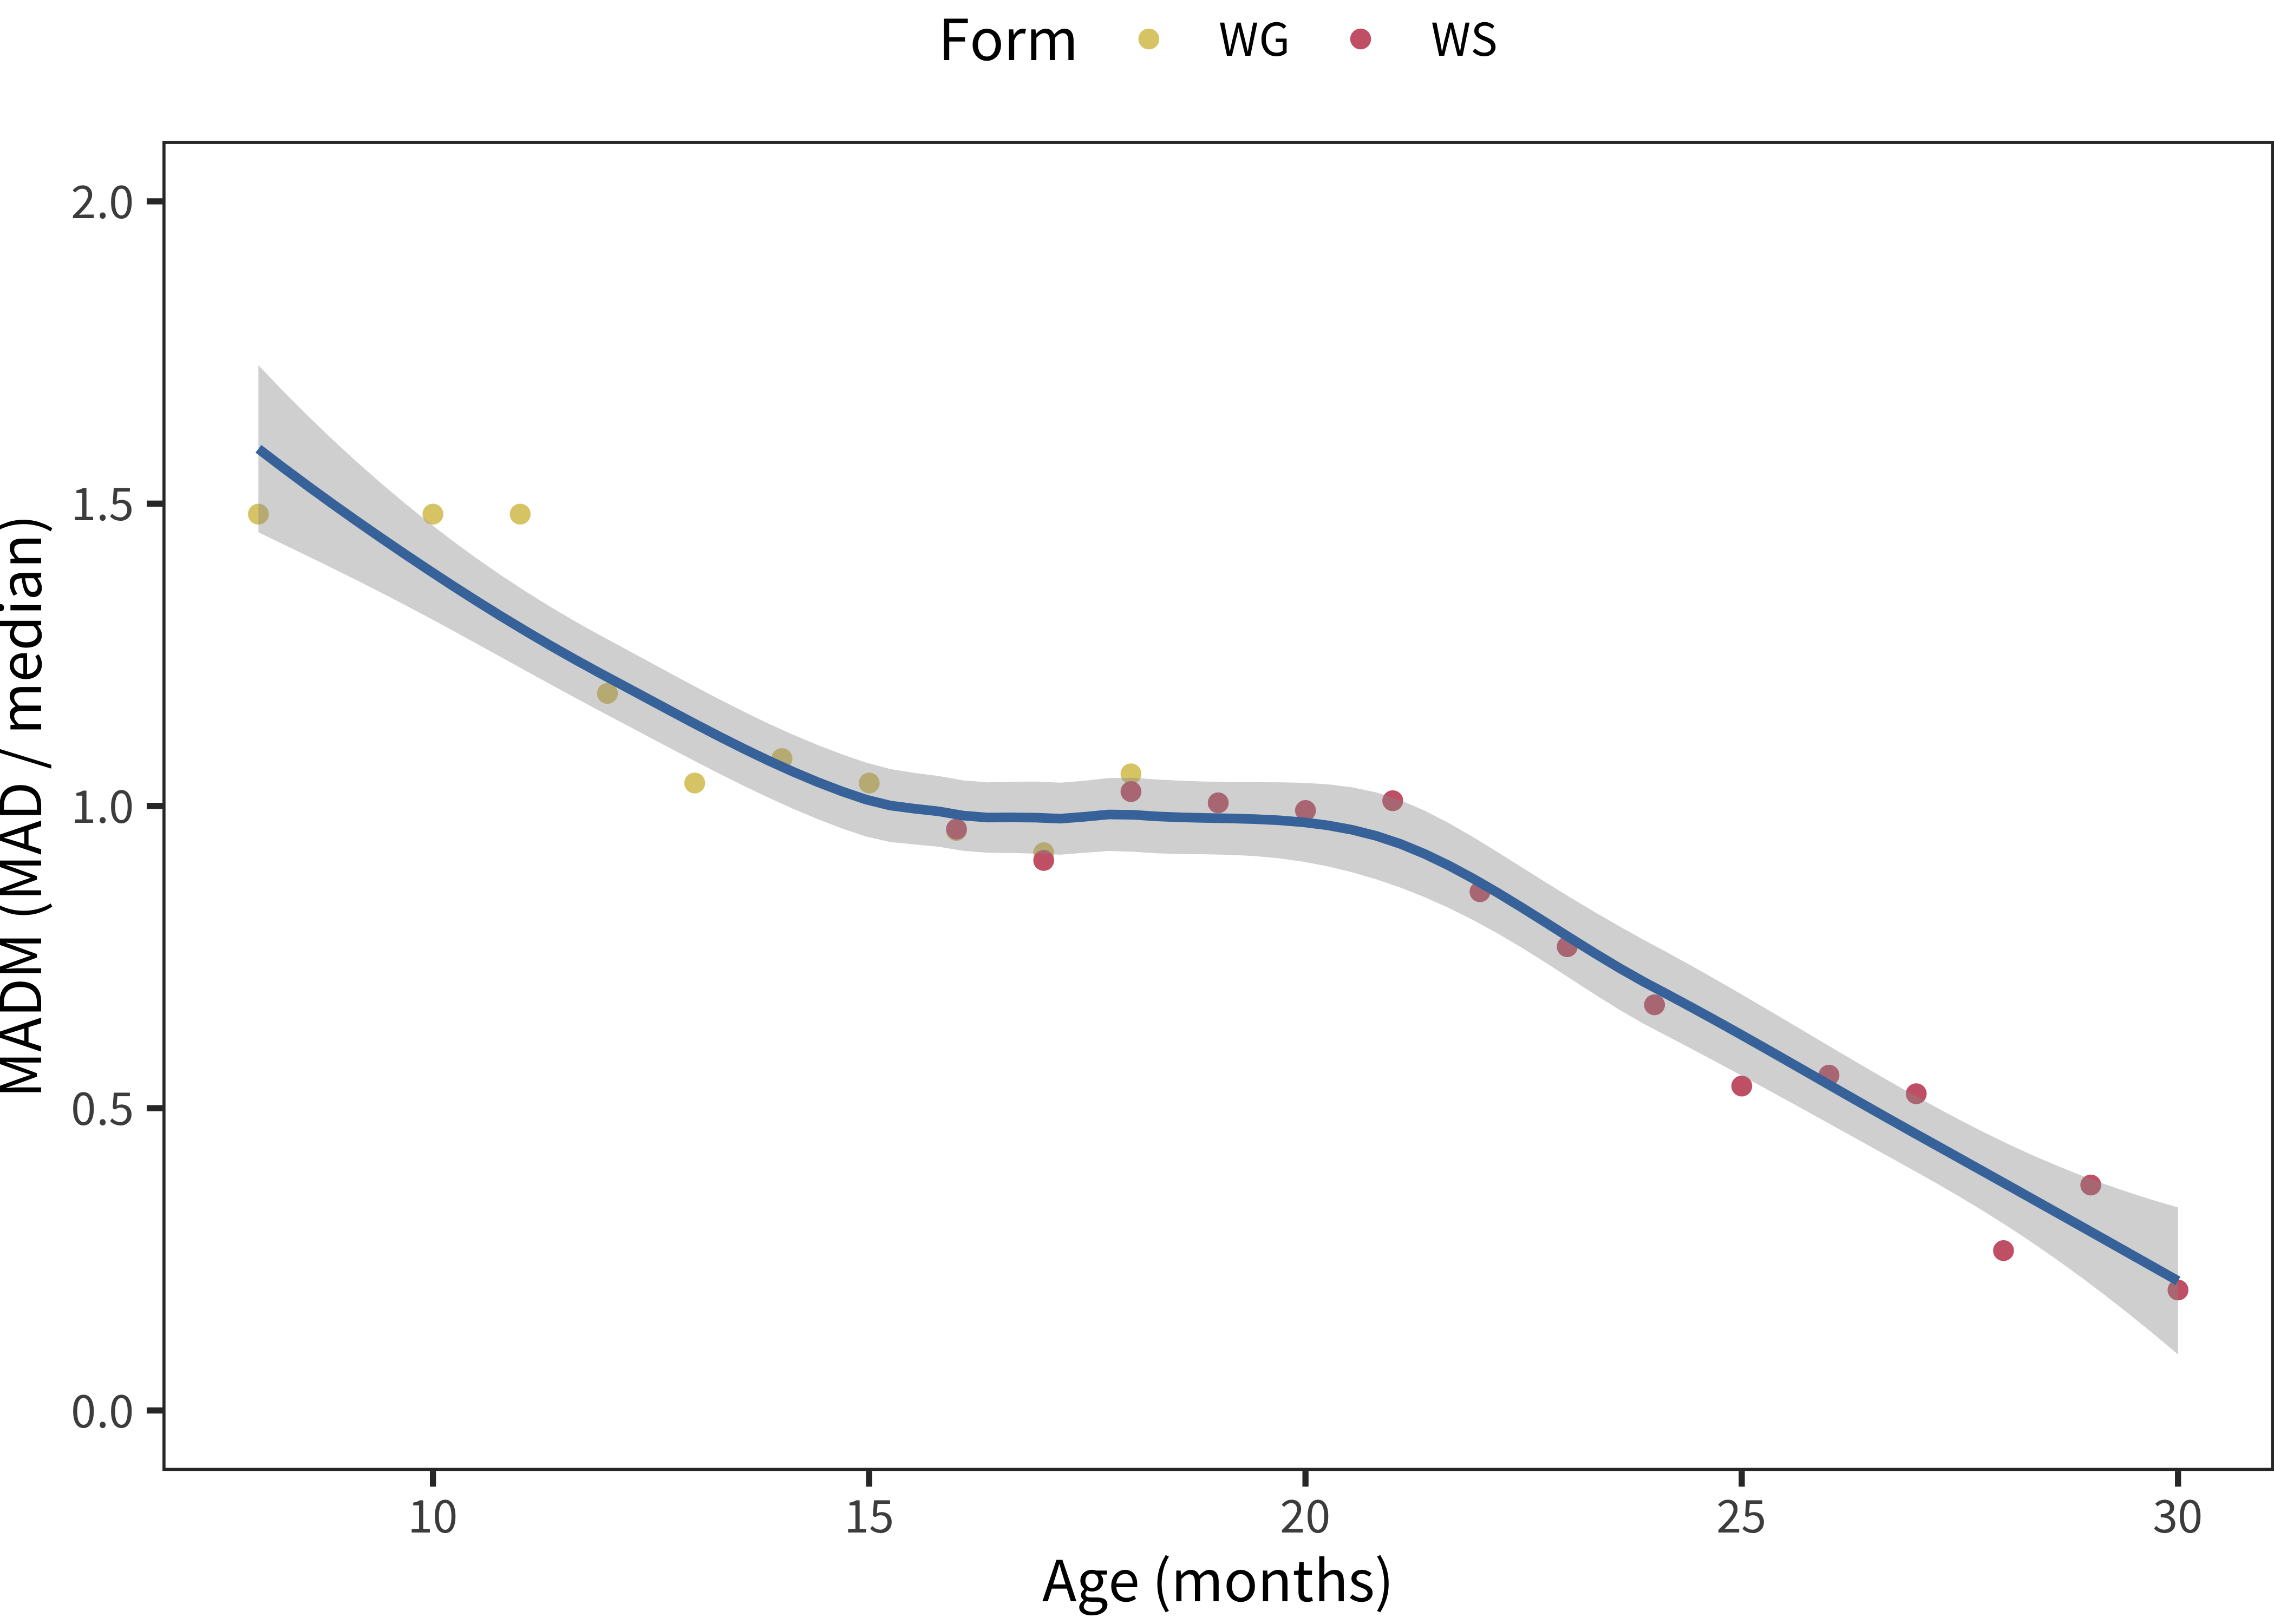 MADM values plotted by age for English (American) production data, across forms. The smoothing line is produced by a loess smoothing function.